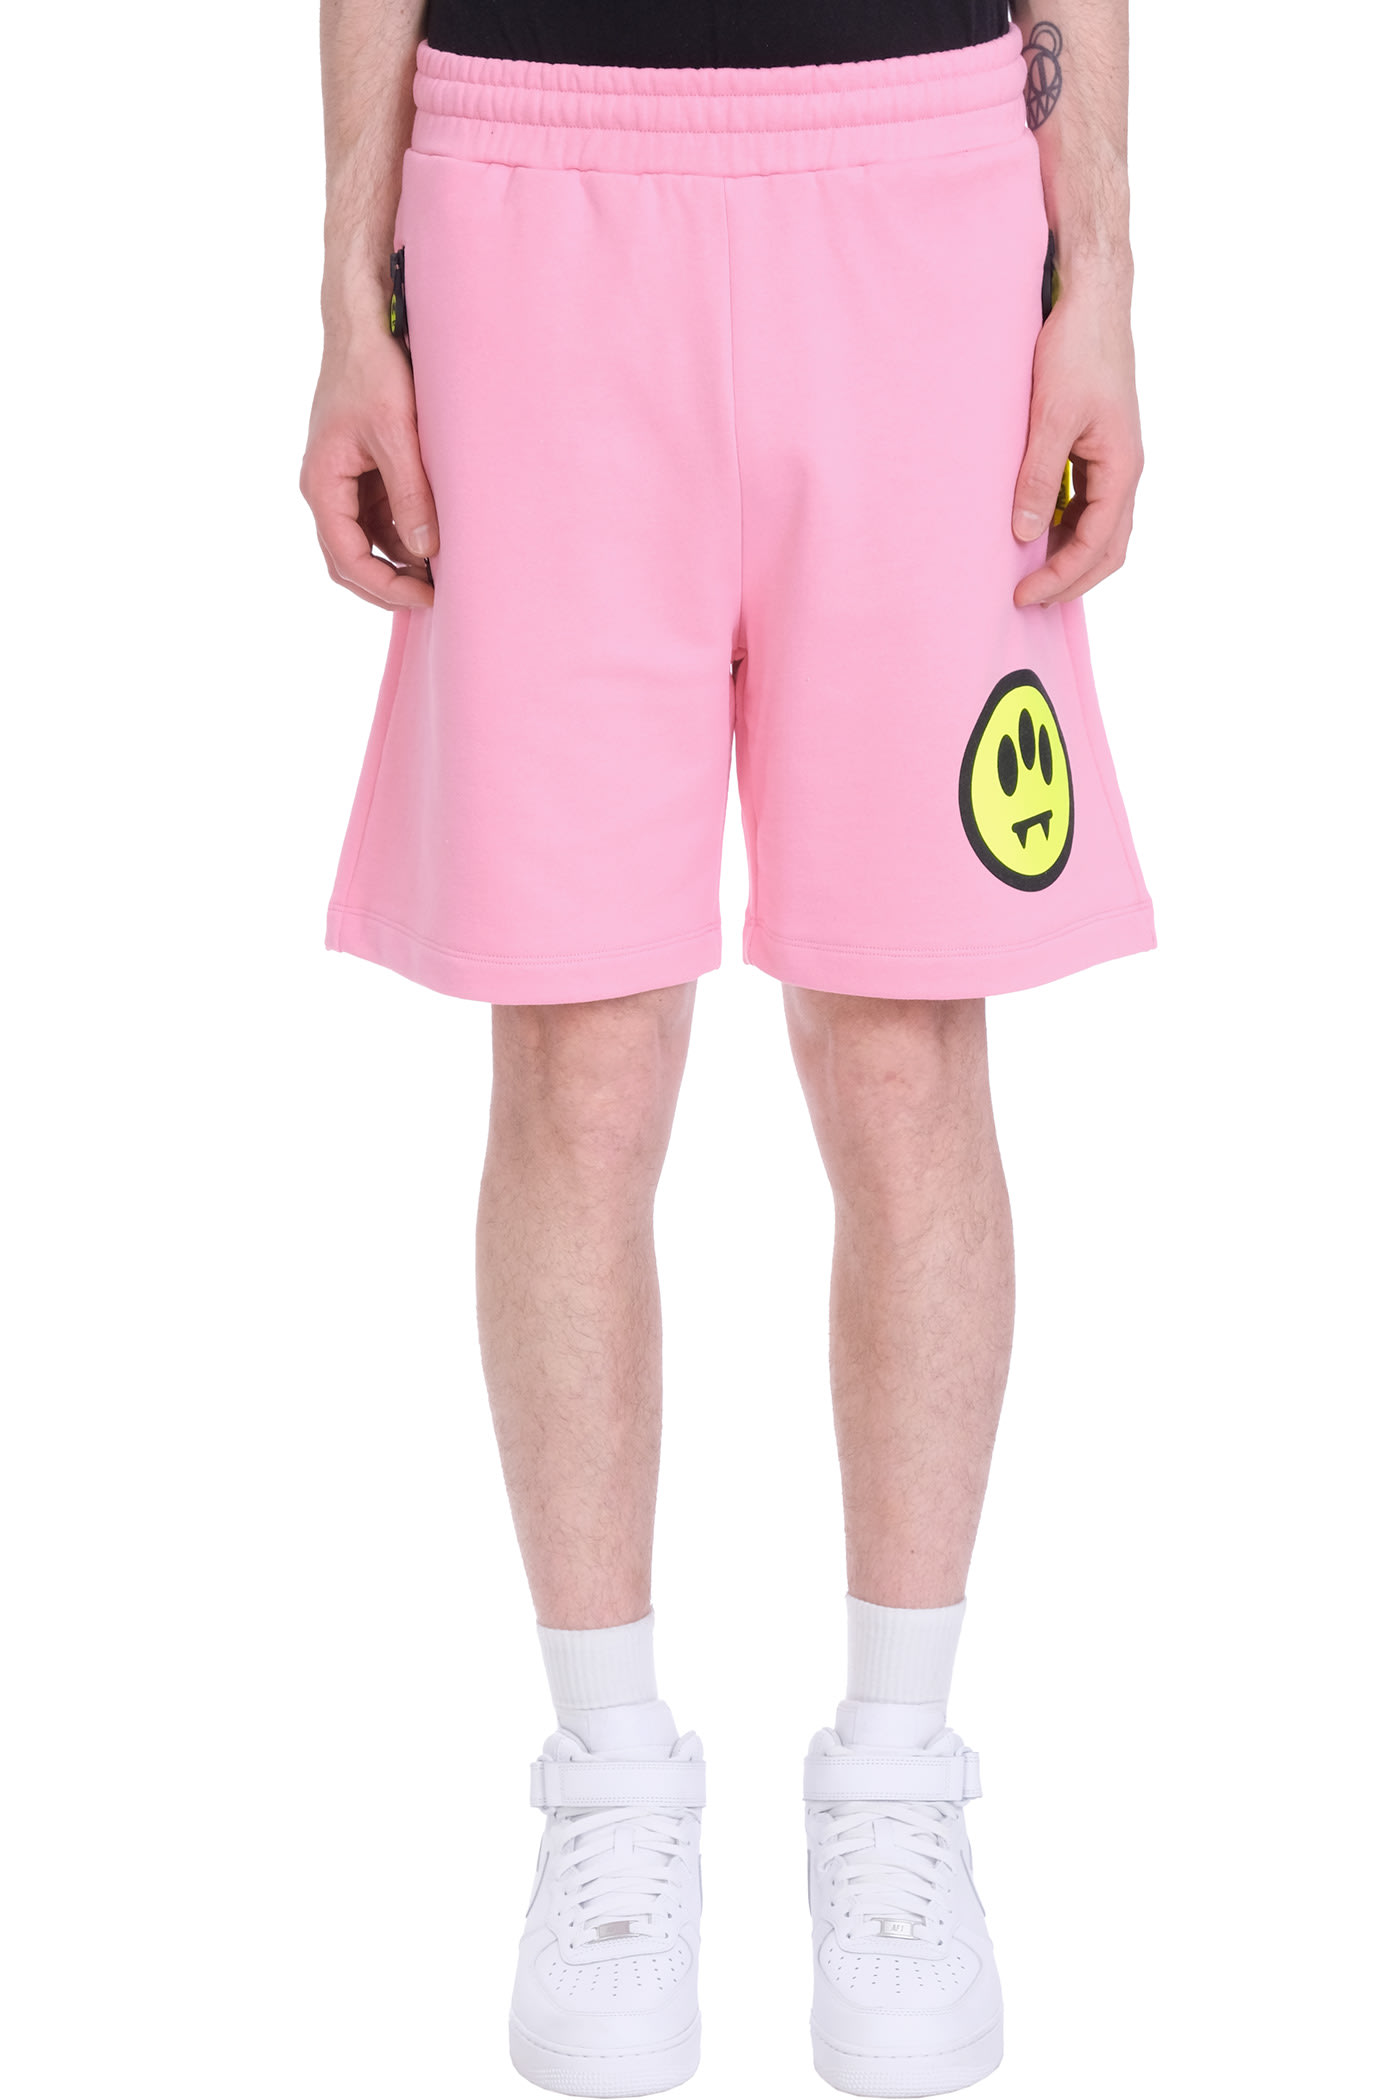 BARROW SHORTS IN ROSE-PINK POLYESTER,026779045